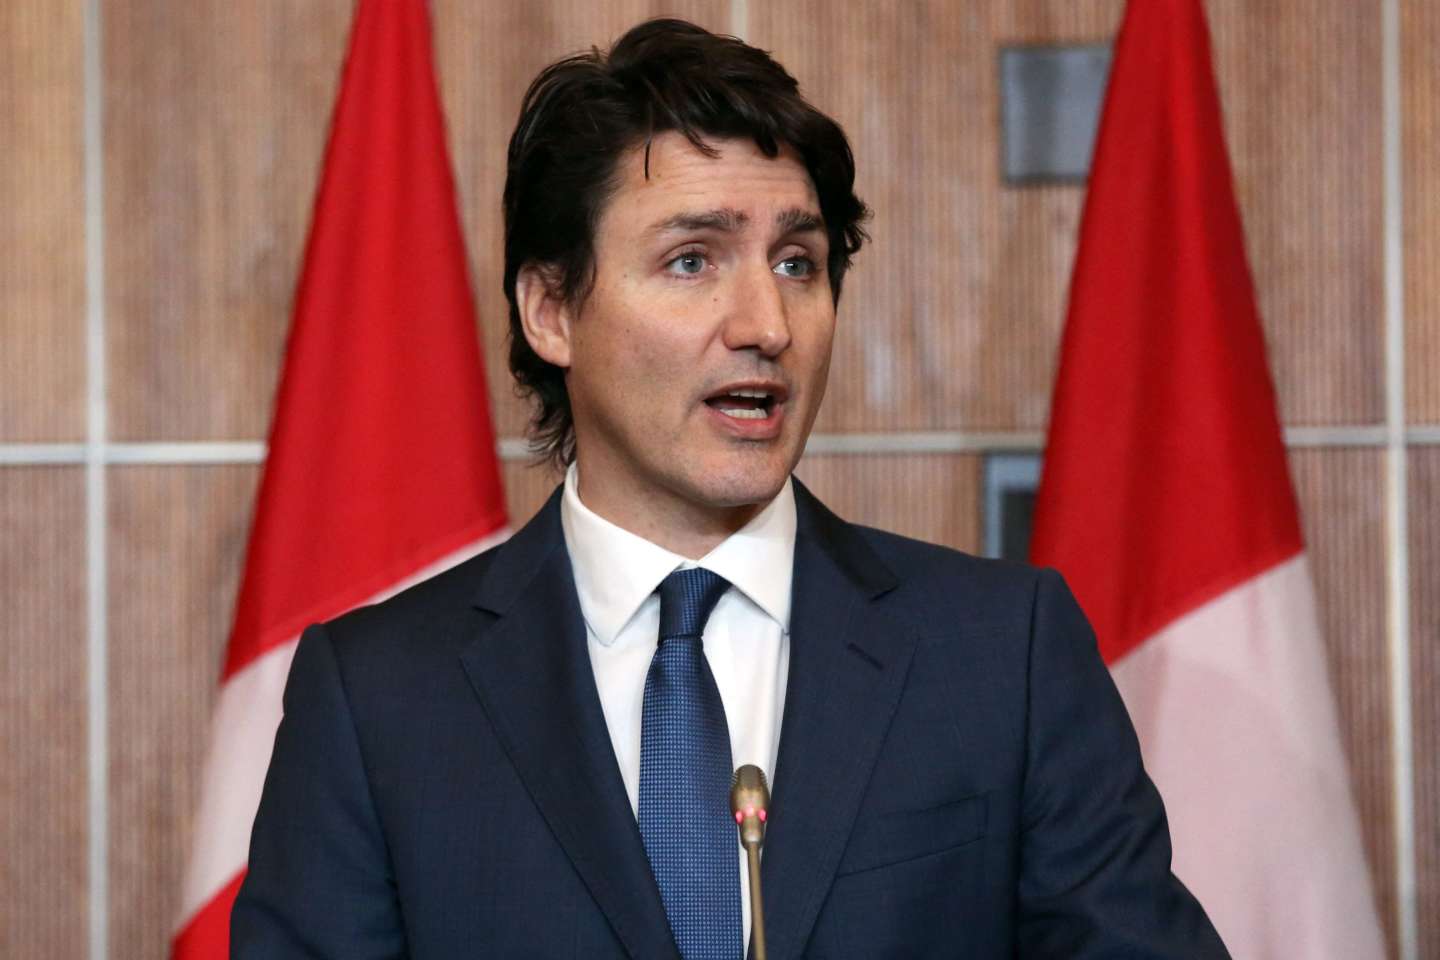 Canadian airspace shoots down an ‘Unidentified object’: Justin Trudeau